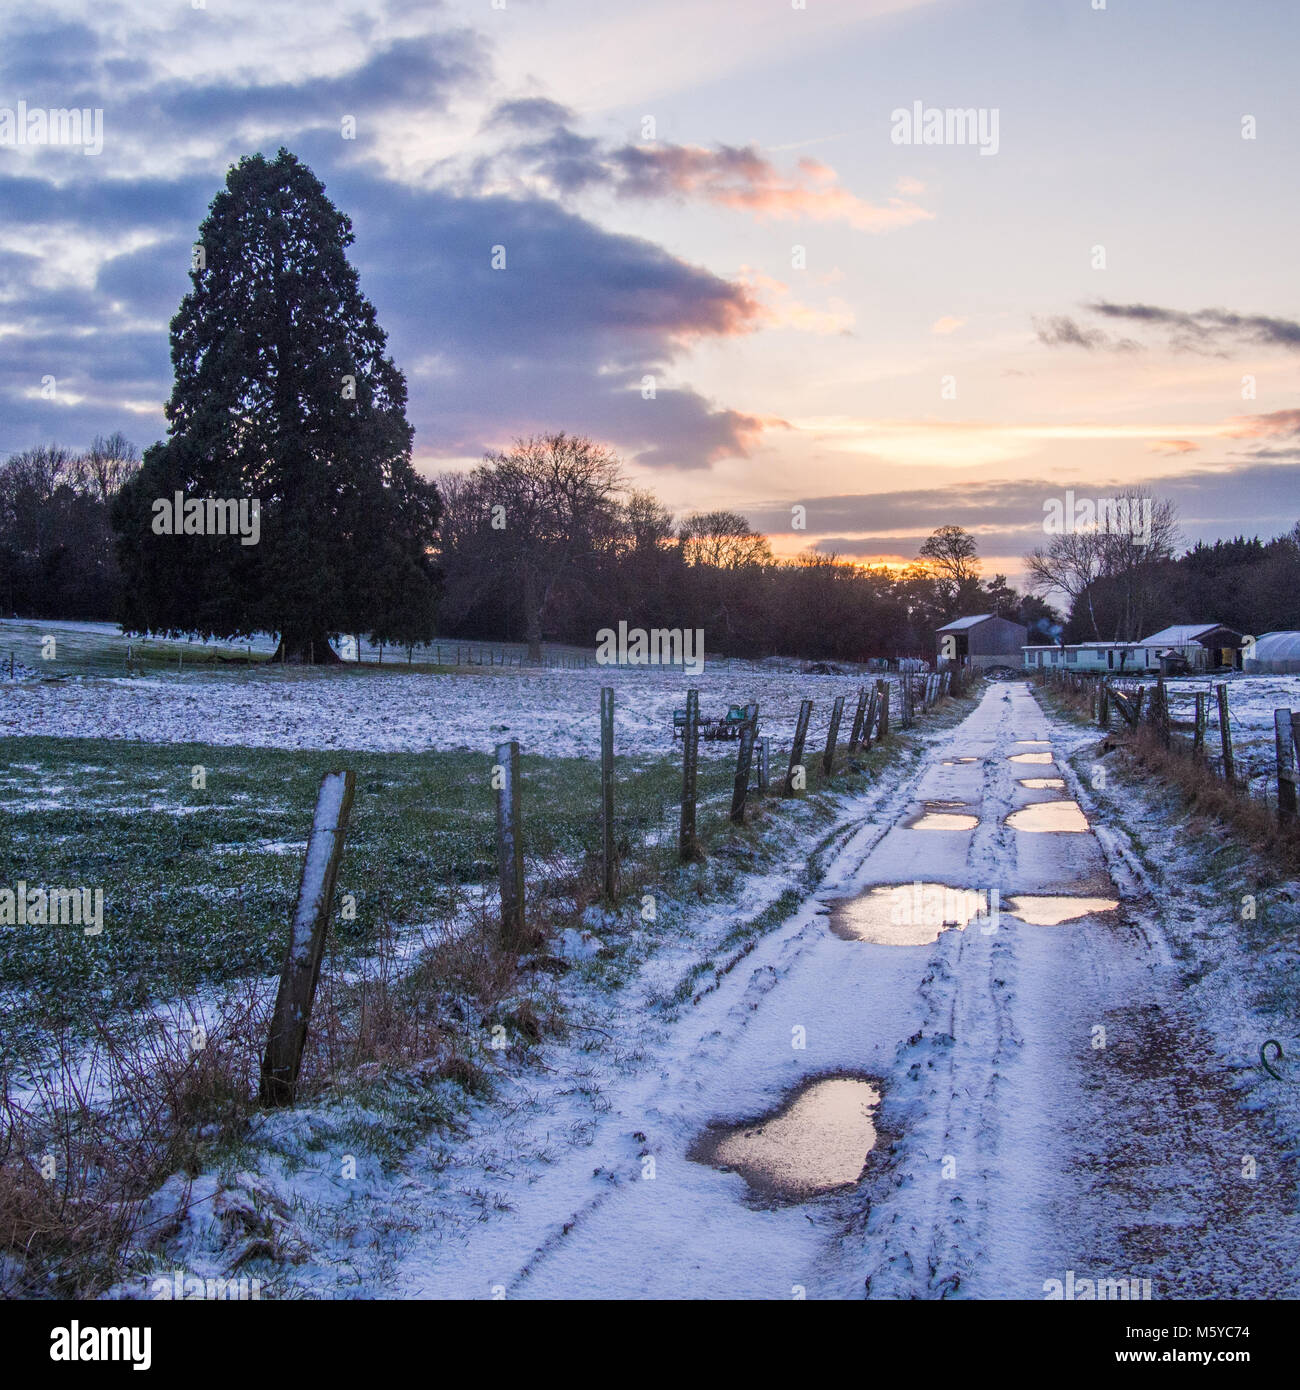 Rural snow scene in Hertfordshire England. Part of the Bhaktivedanta Manor Grounds. Stock Photo